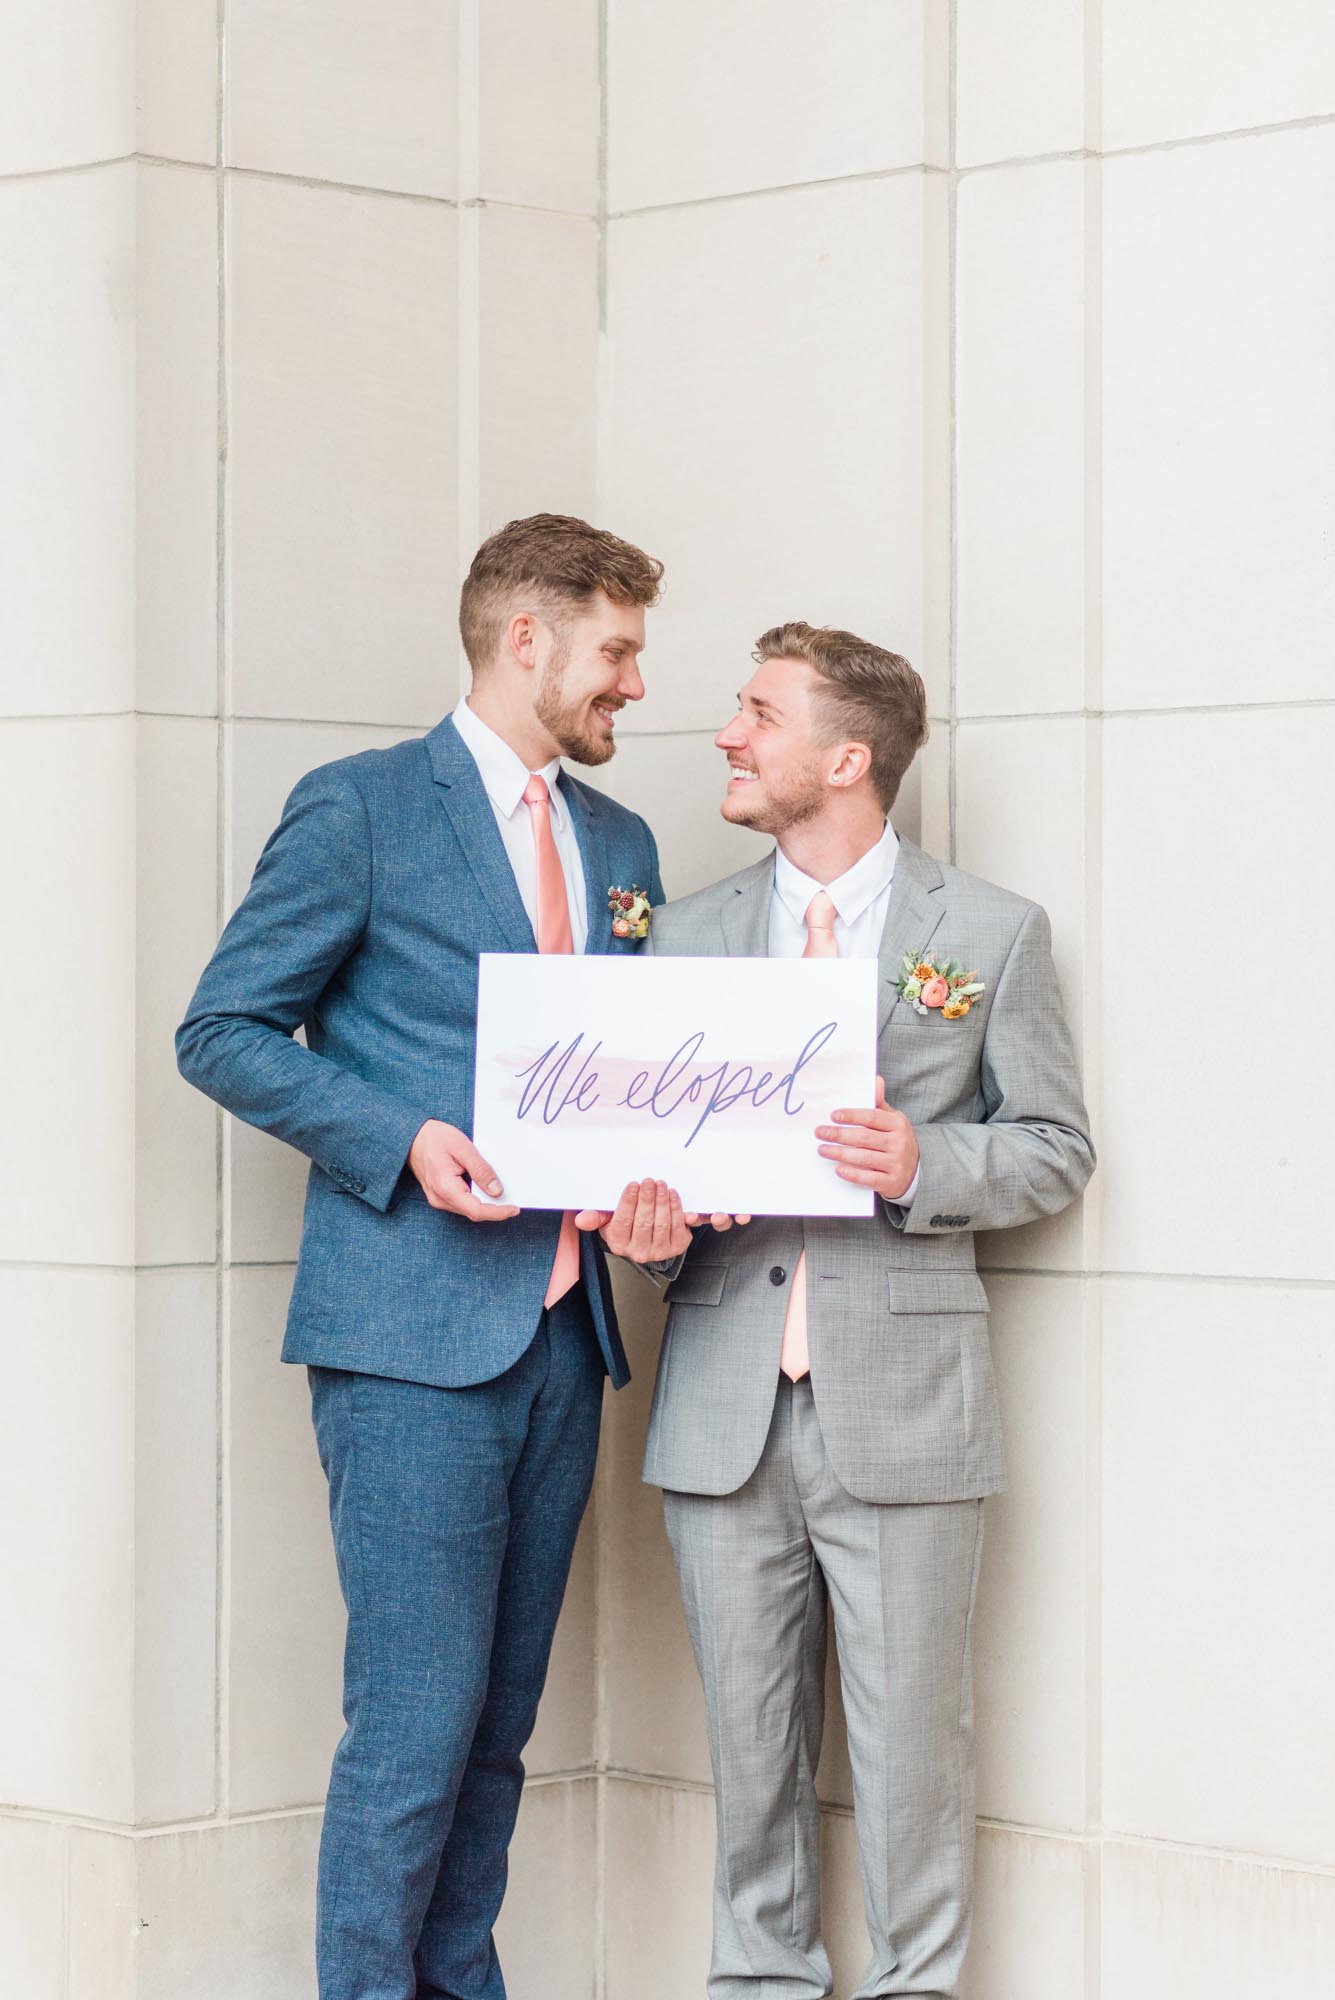 Elopement inspiration with pastel color palette | Samantha Zenewicz Photography | Featured on Equally Wed, the leading LGBTQ+ wedding magazine